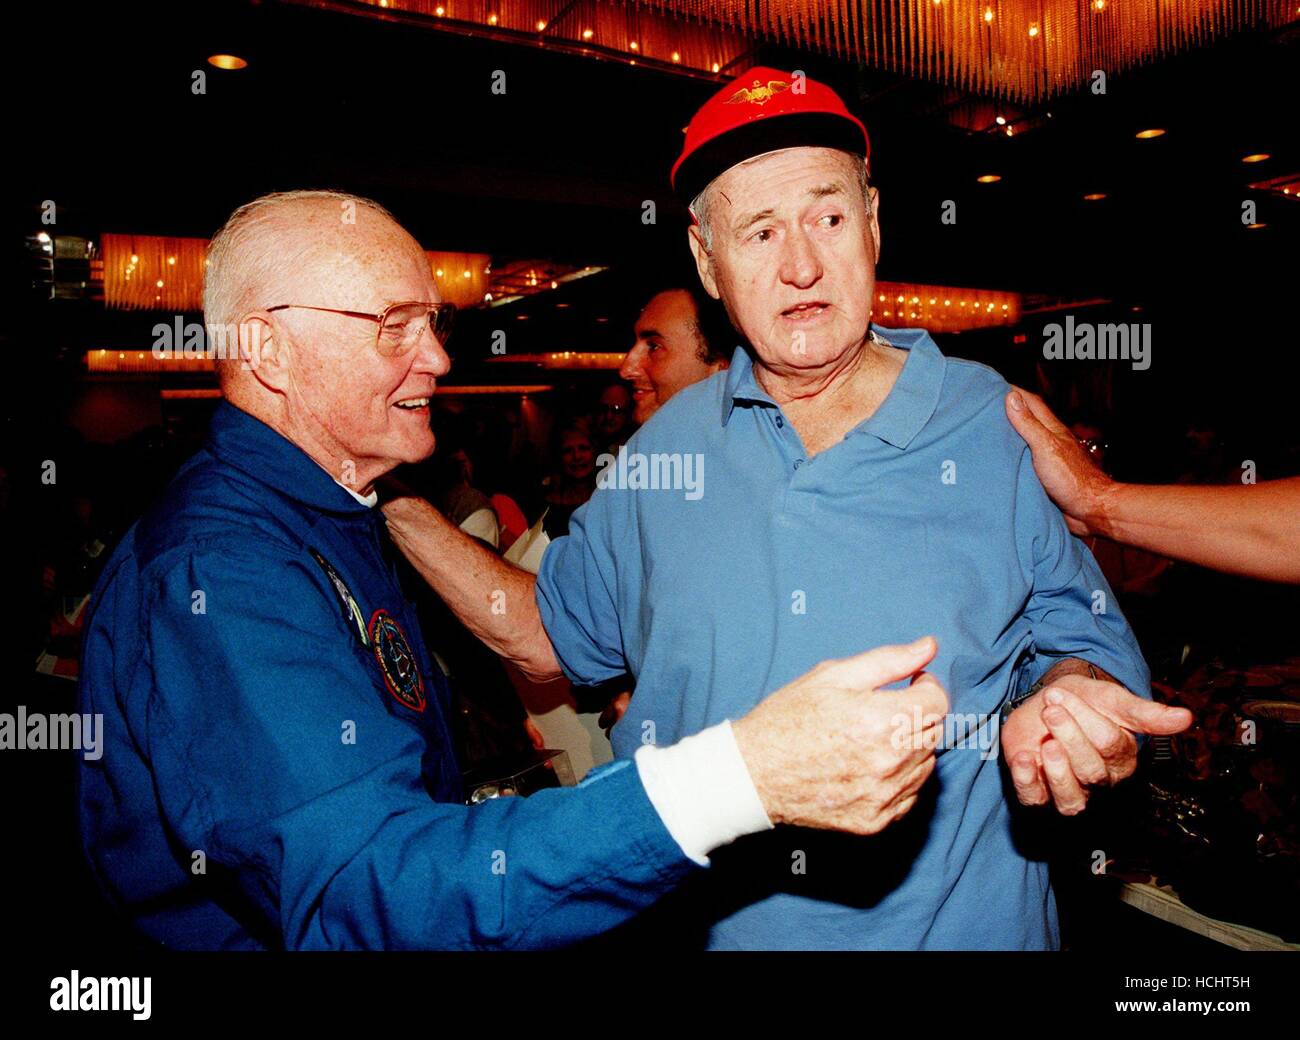 STS-95 Payload Specialist John H. Glenn Jr. (left) greets baseball legend Ted Williams at a reception at the Double Tree Oceanfront Hotel following a parade down State Road A1A in nearby Cocoa Beach on December 11, 1998. Organizers of the parade included the Cocoa Beach Area Chamber of Commerce, the Brevard County Tourist Development Council, and the cities of Cape Canaveral and Cocoa Beach. The parade is reminiscent of those held after missions during the Mercury Program..Credit: NASA via CNP  - NO WIRE SERVICE - Photo: Nasa/Consolidated News Photos/NASA via CNP Stock Photo